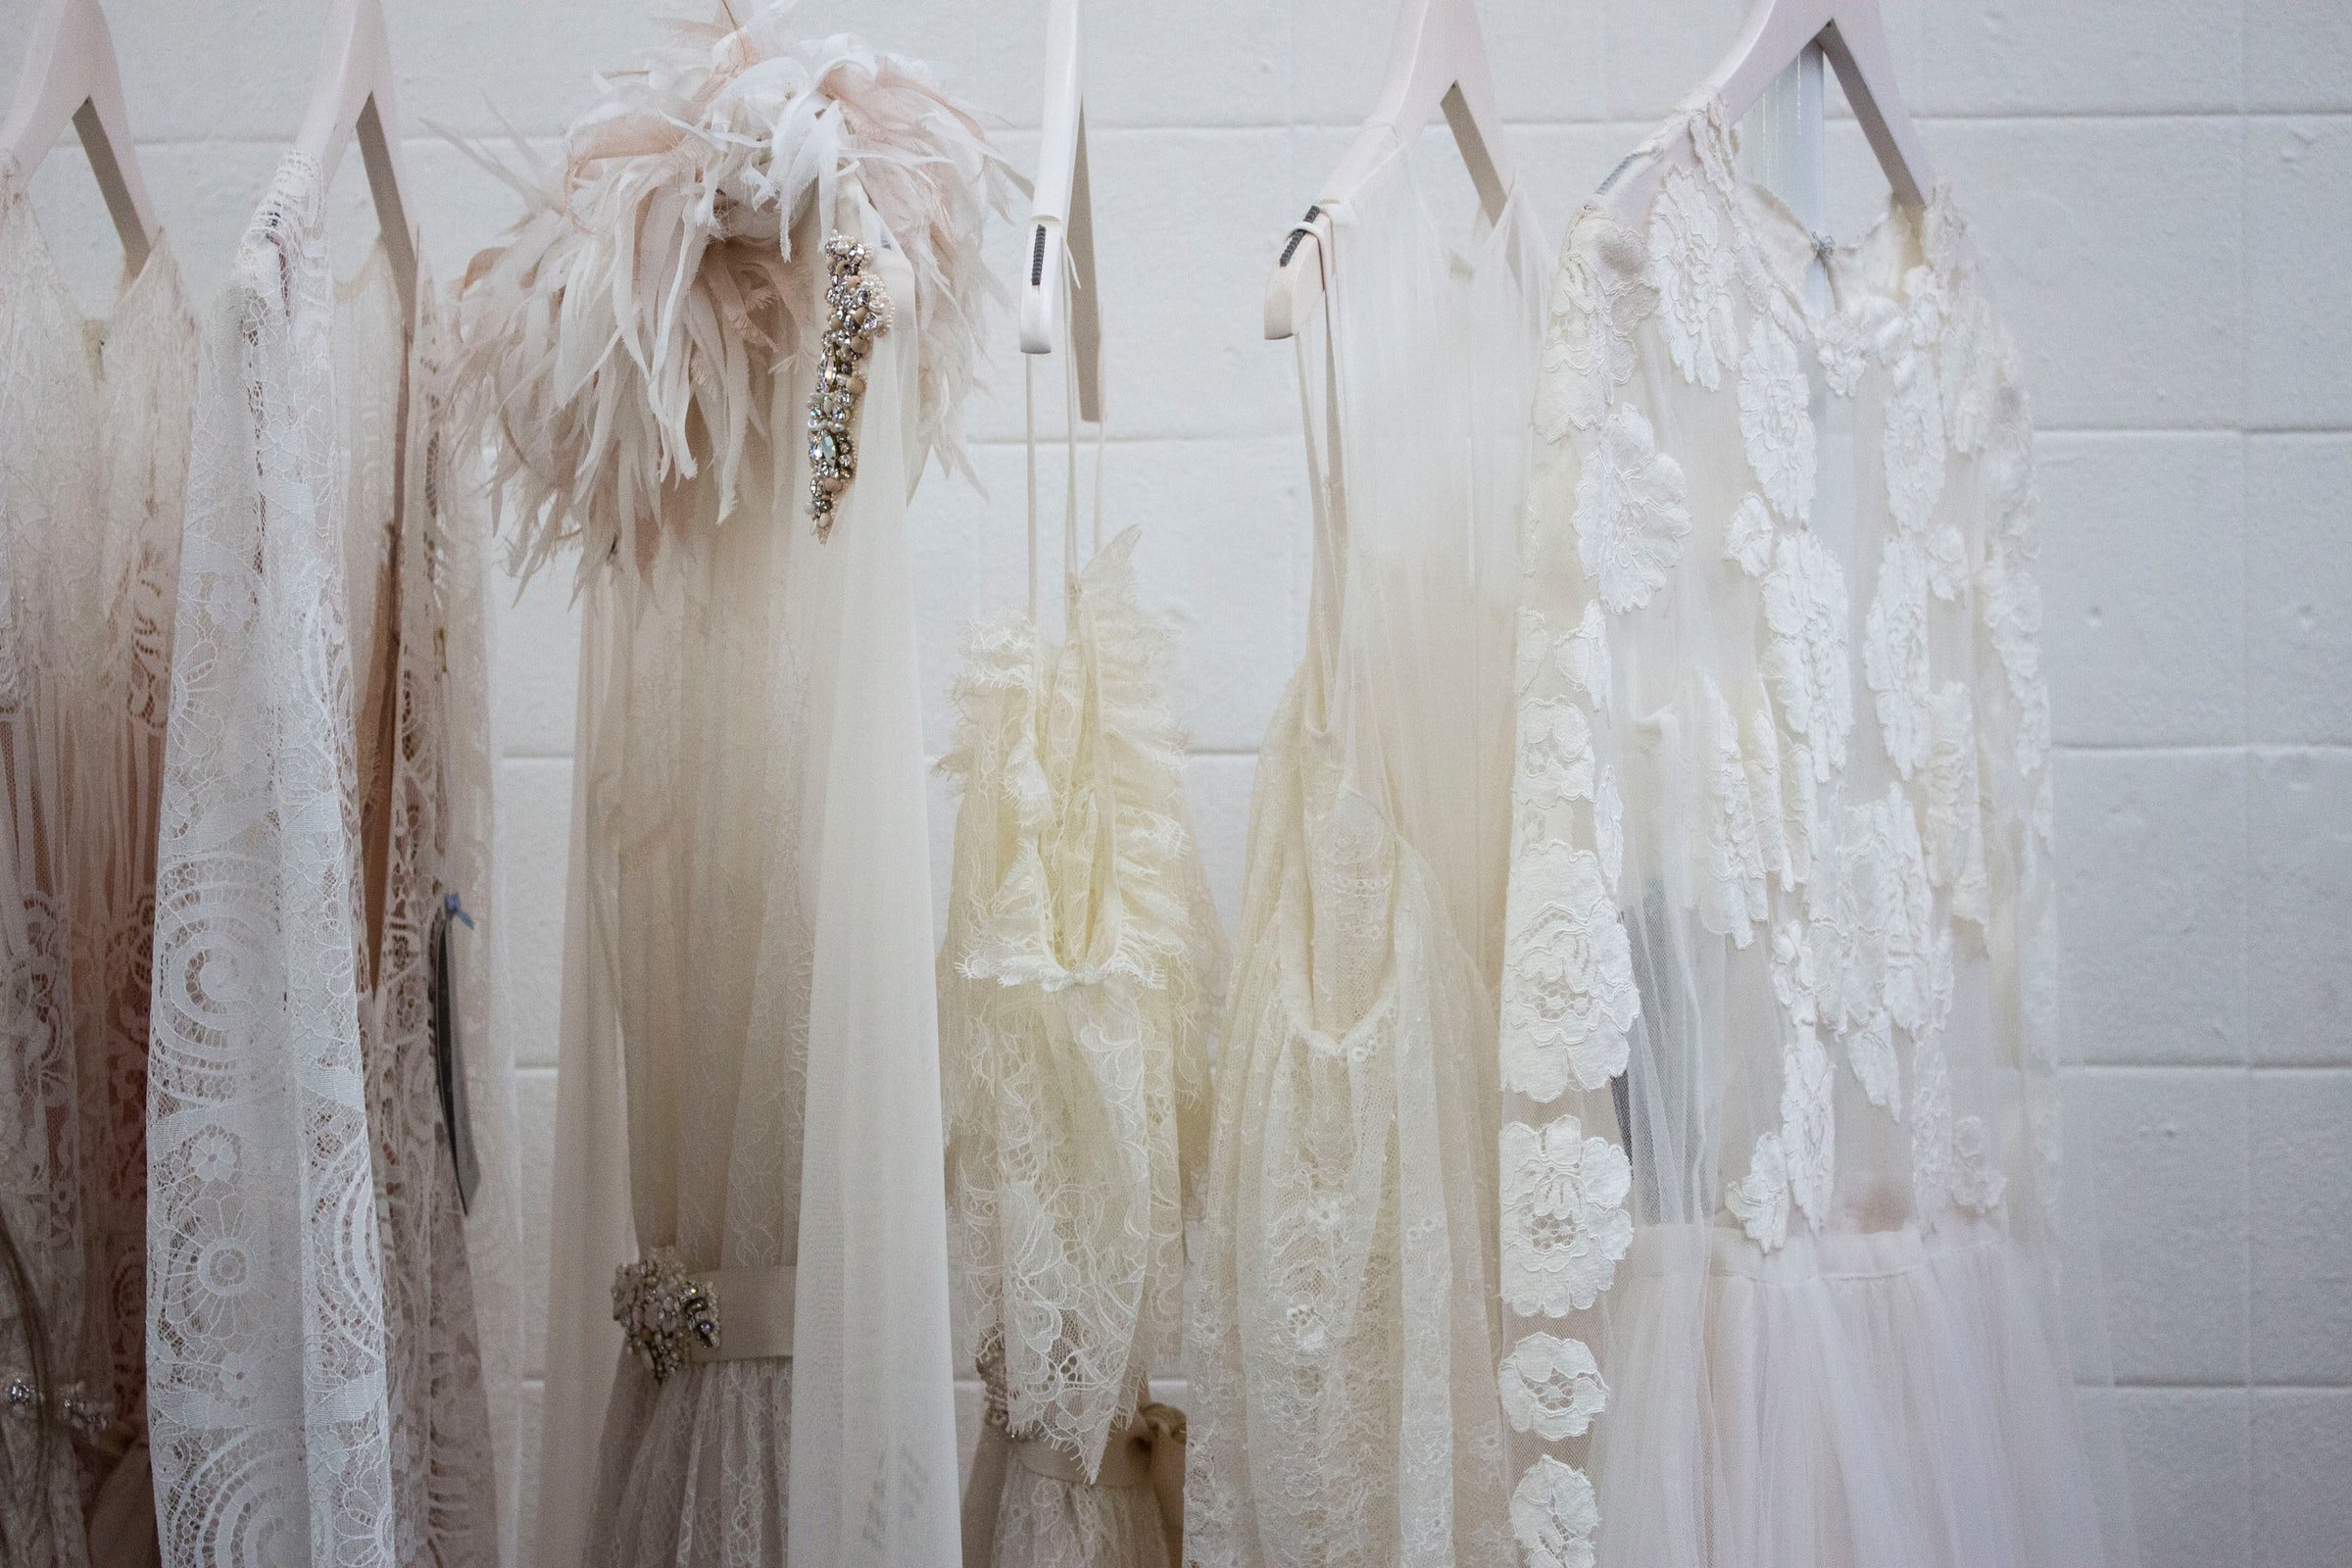 White dresses hanging on a stand | Source: Unsplash